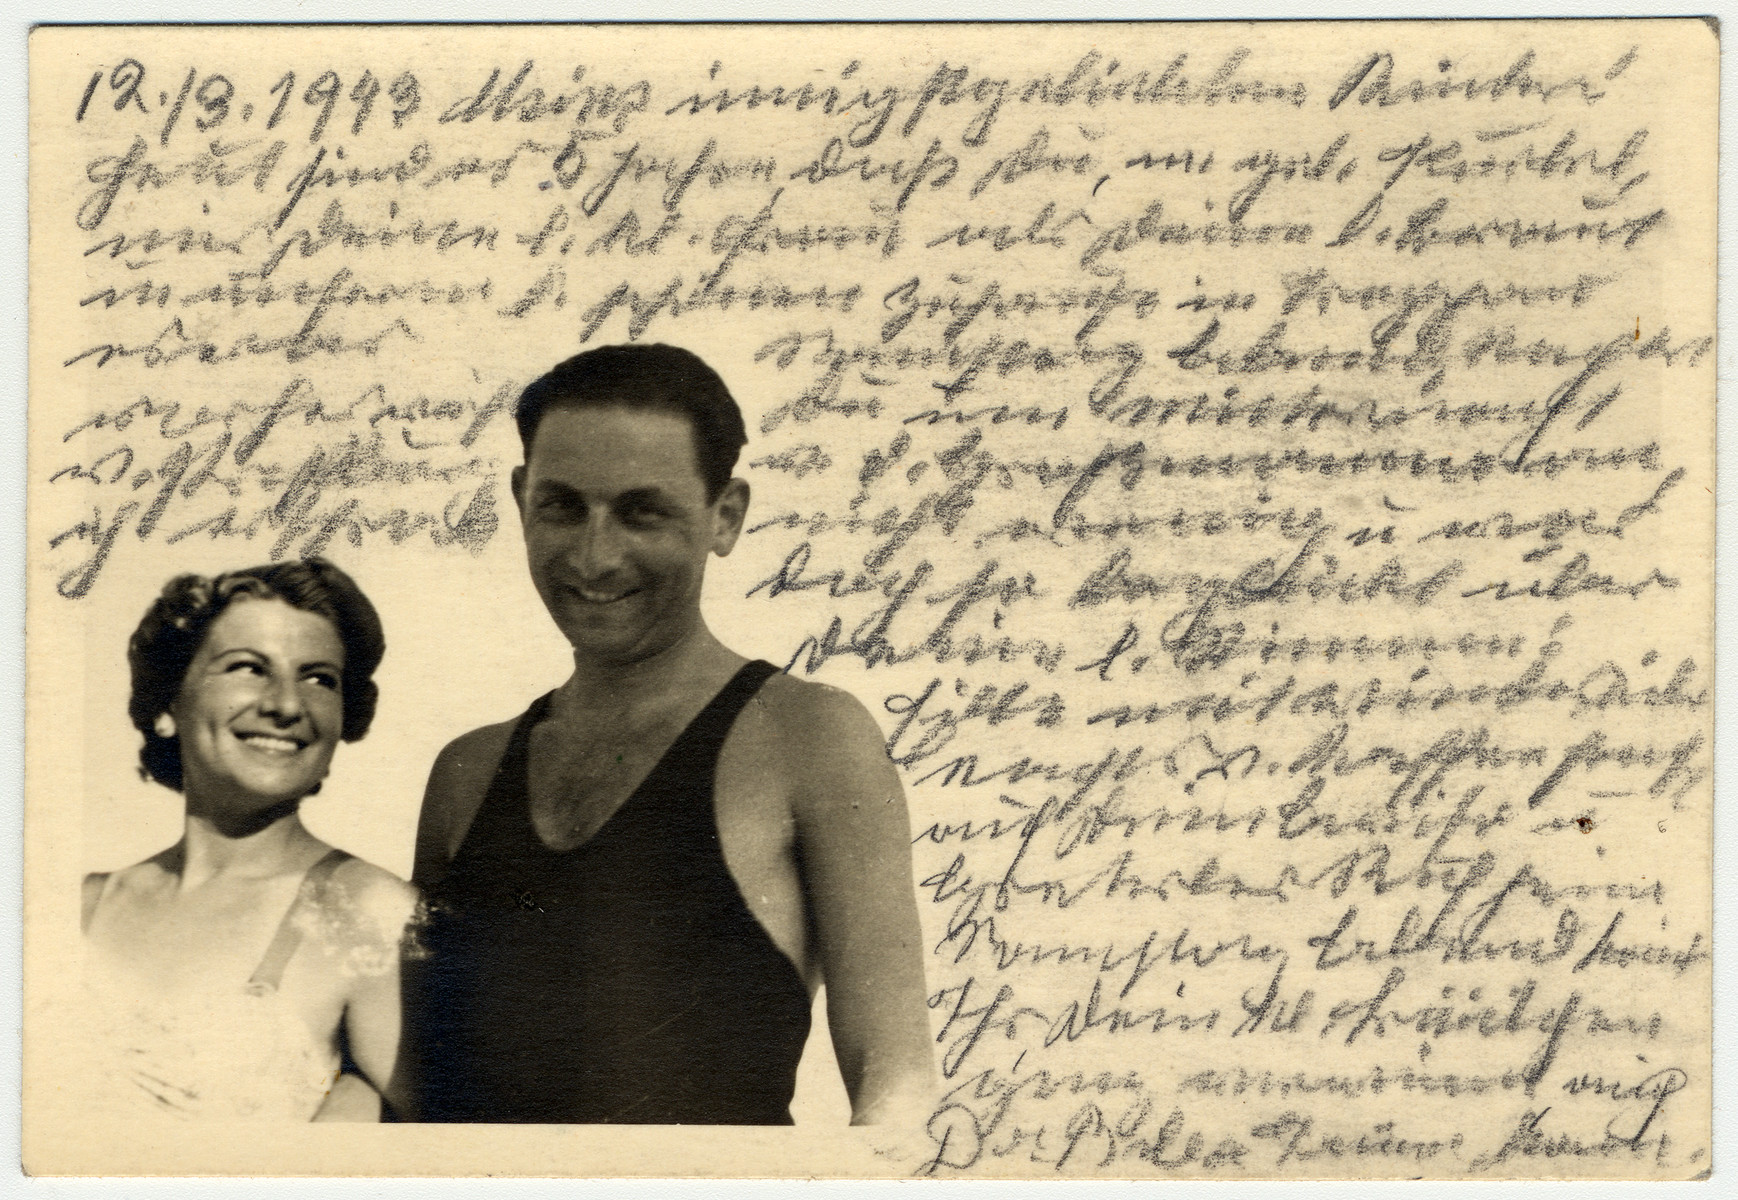 Photograph representing Kurt, Helene Reik's son, and his wife, on vacation in April/Mai 1938 in Kupari, Croatia.  

The photograph was sent to Helene Reik who used it as paper for her diary in the Theresienstadt ghetto.